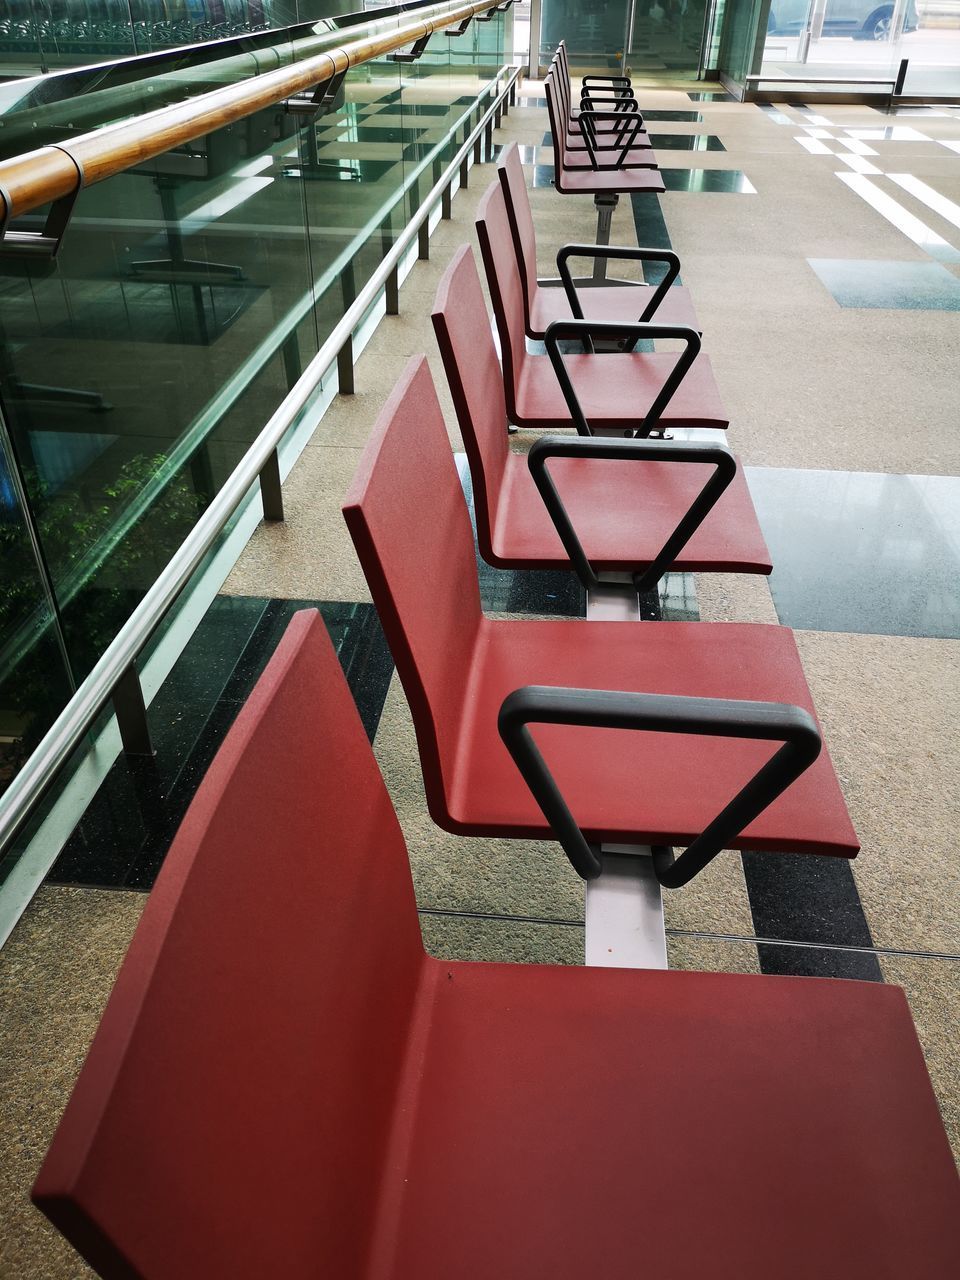 HIGH ANGLE VIEW OF EMPTY CHAIRS AND TABLES IN ROW